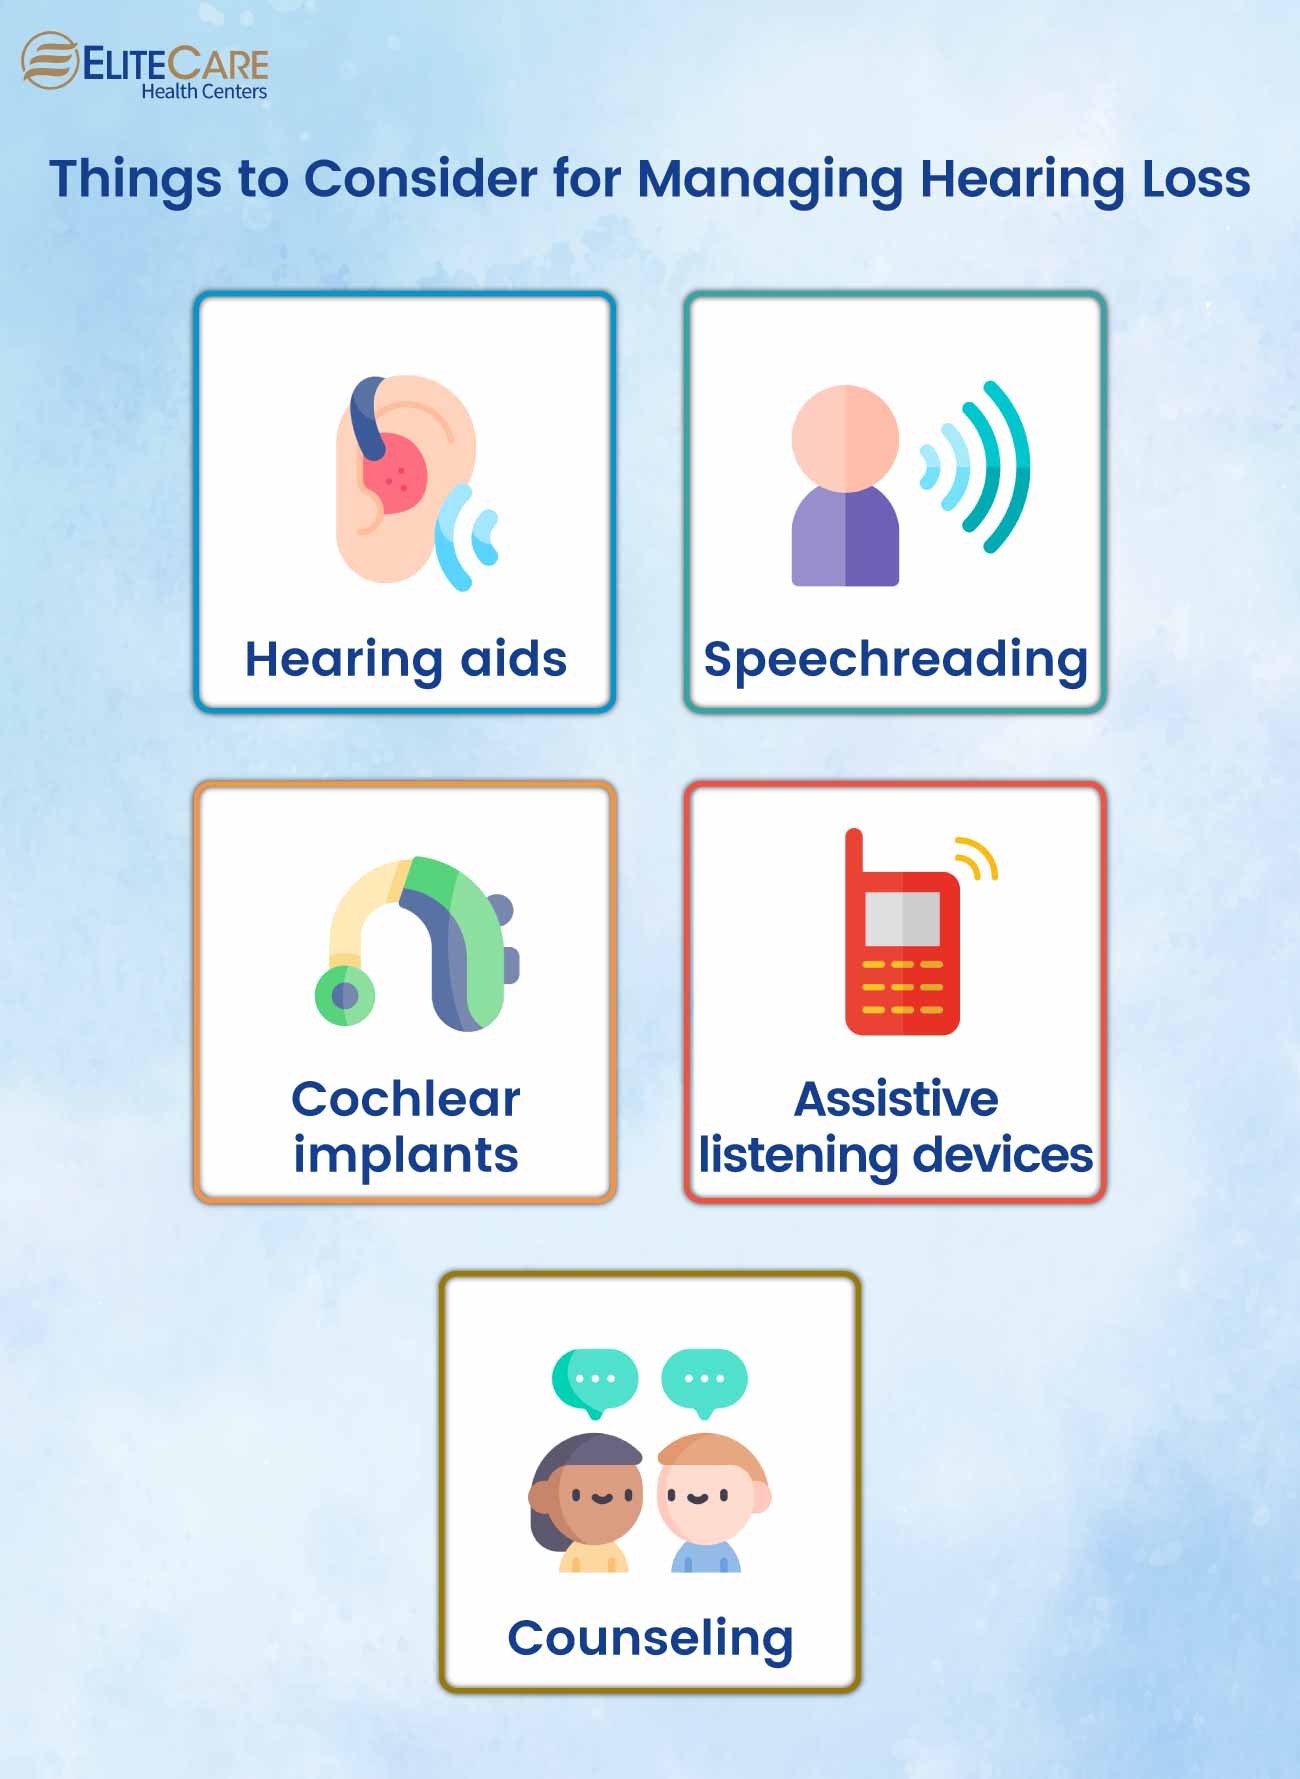 Things to Consider for Managing Hearing Loss